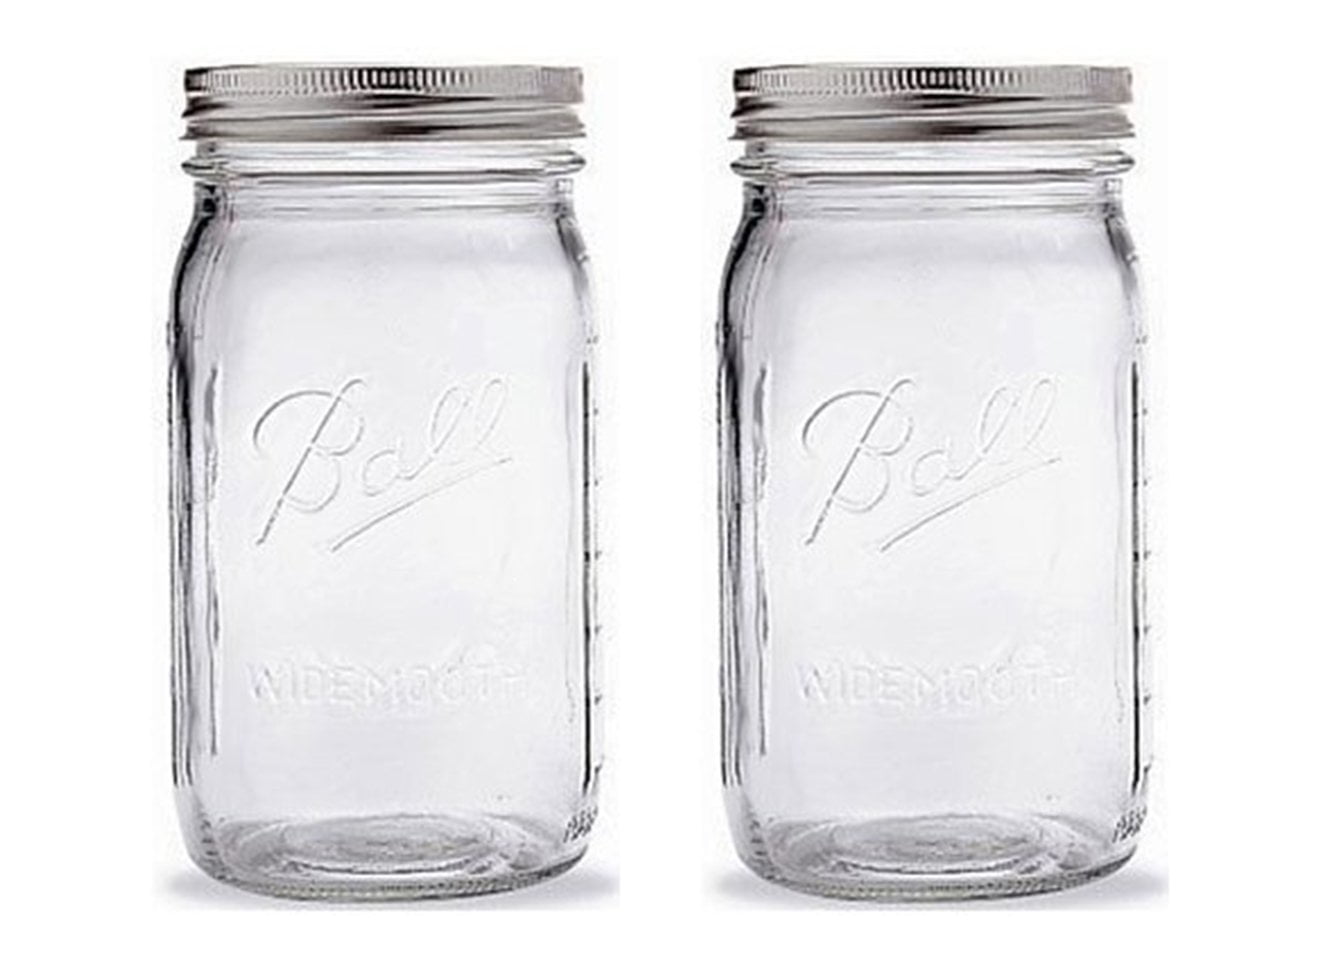 Ball Mason Jar-32 oz Clear Glass Ball Heritage-Lot of 2 Jars With Extra Lids 